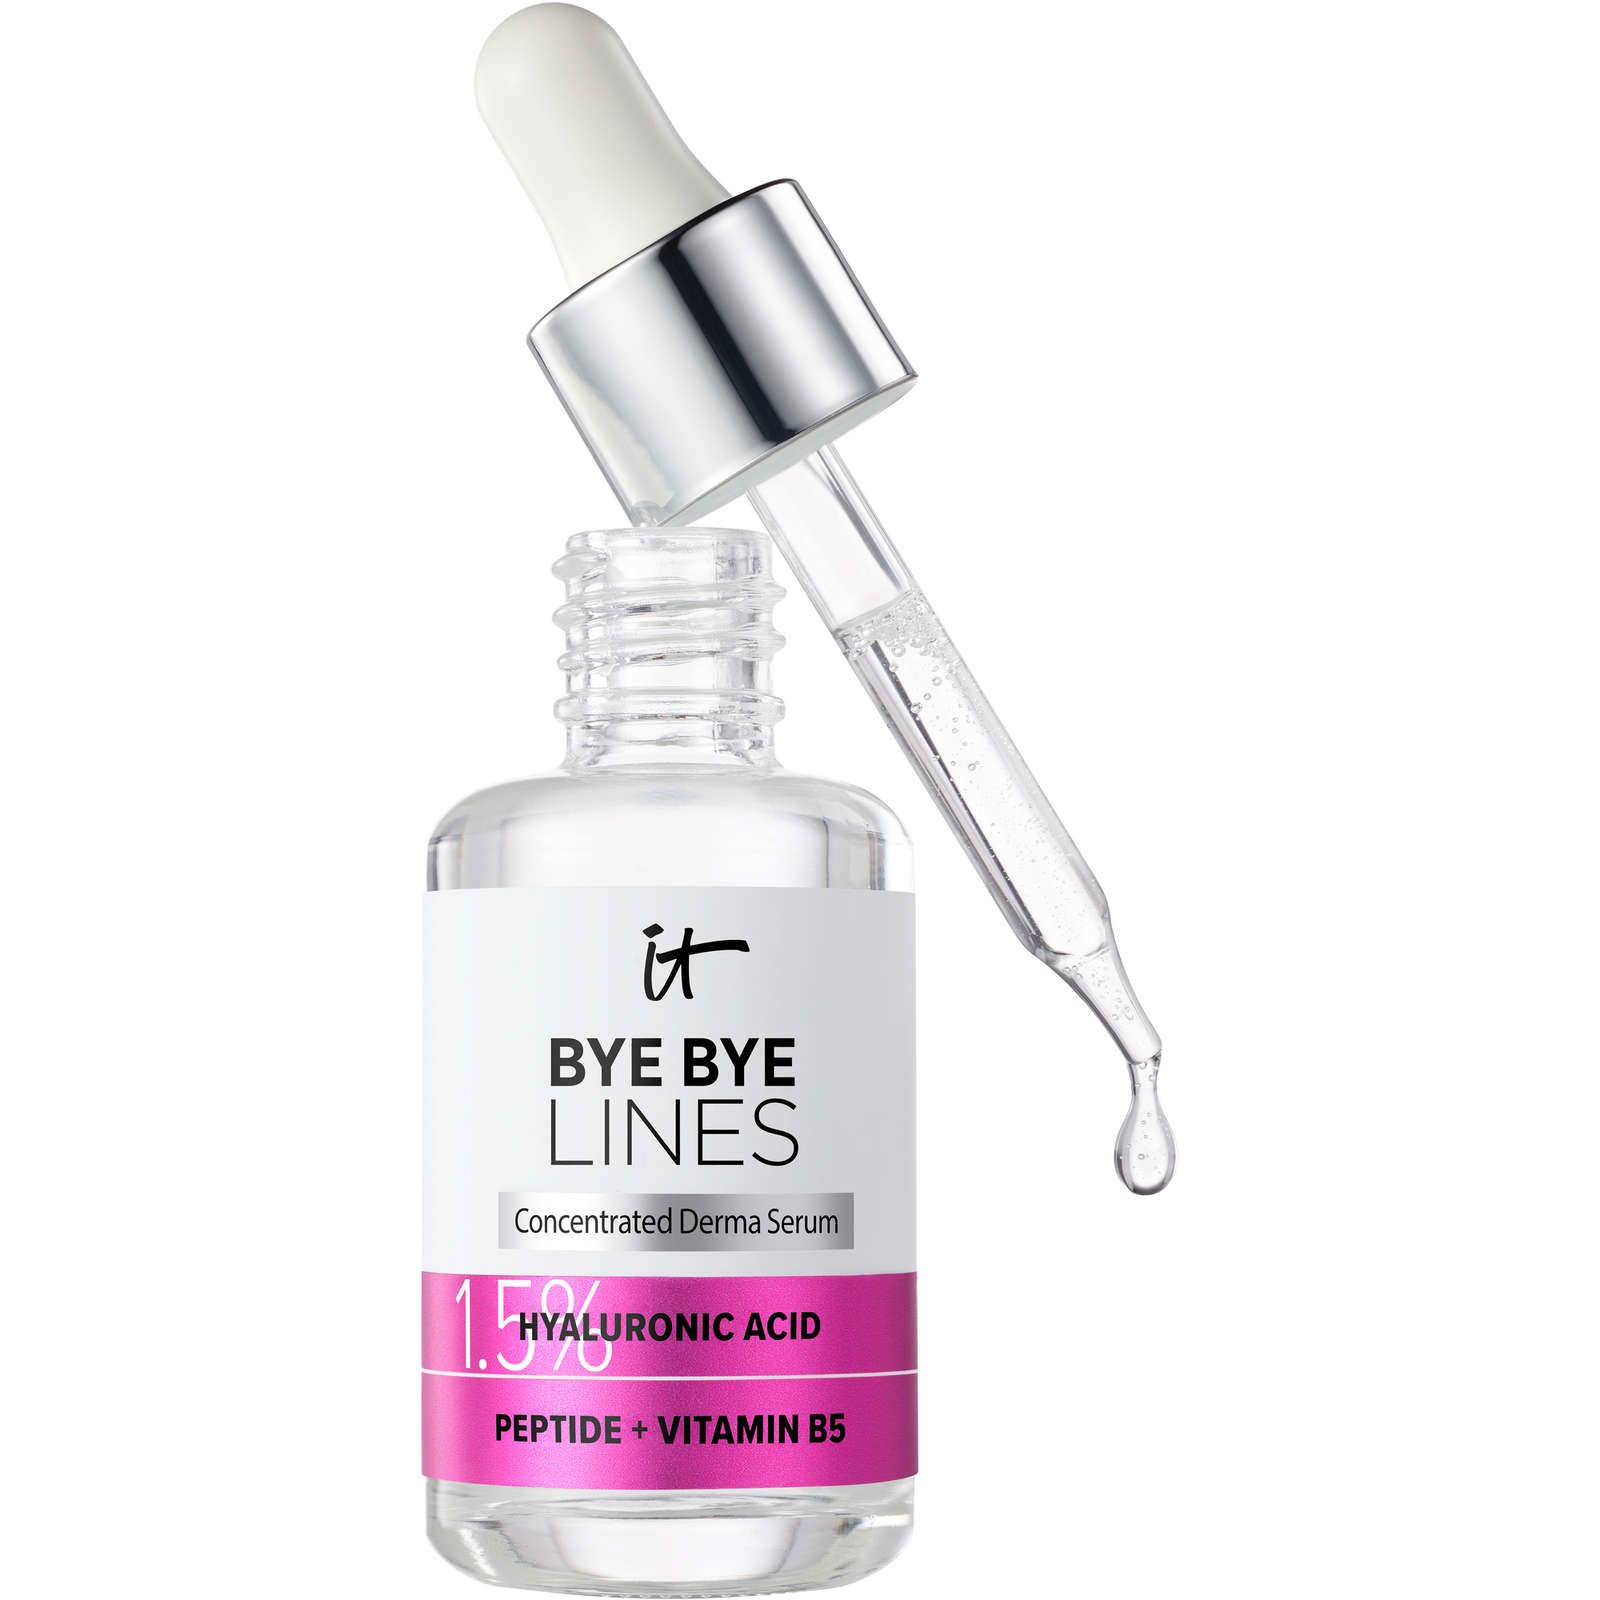 1.5% Hyaluronic Acid, Peptide Bye Bye Lines Concentrated Derma Serum | Shoppers Drug Mart - Beauty